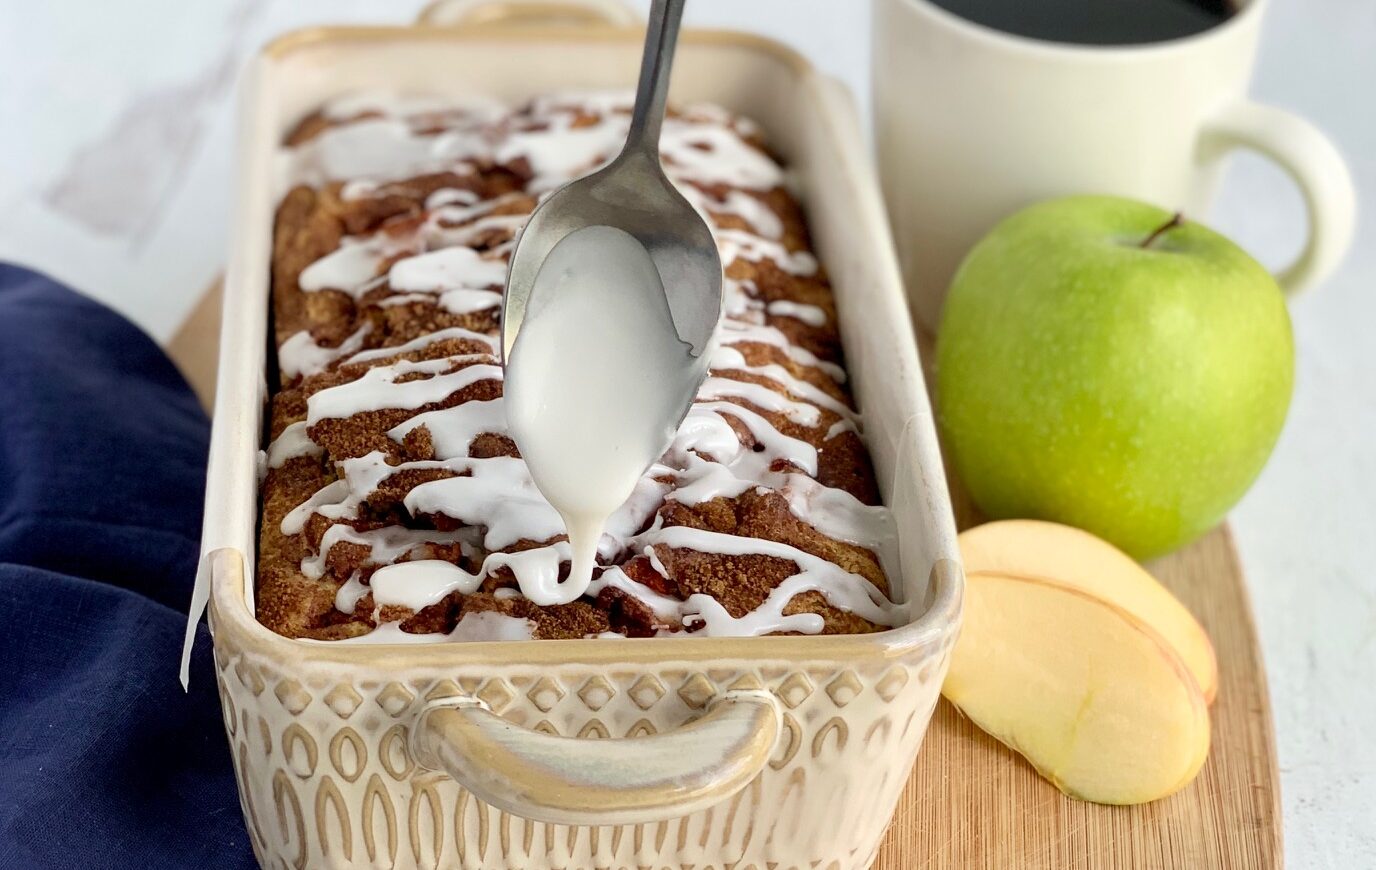 A loaf of bread still in the pan with a spoon drizzling white drizzle across the top in a zig zag motion next to a green Granny Smith apple and a cup of coffee.